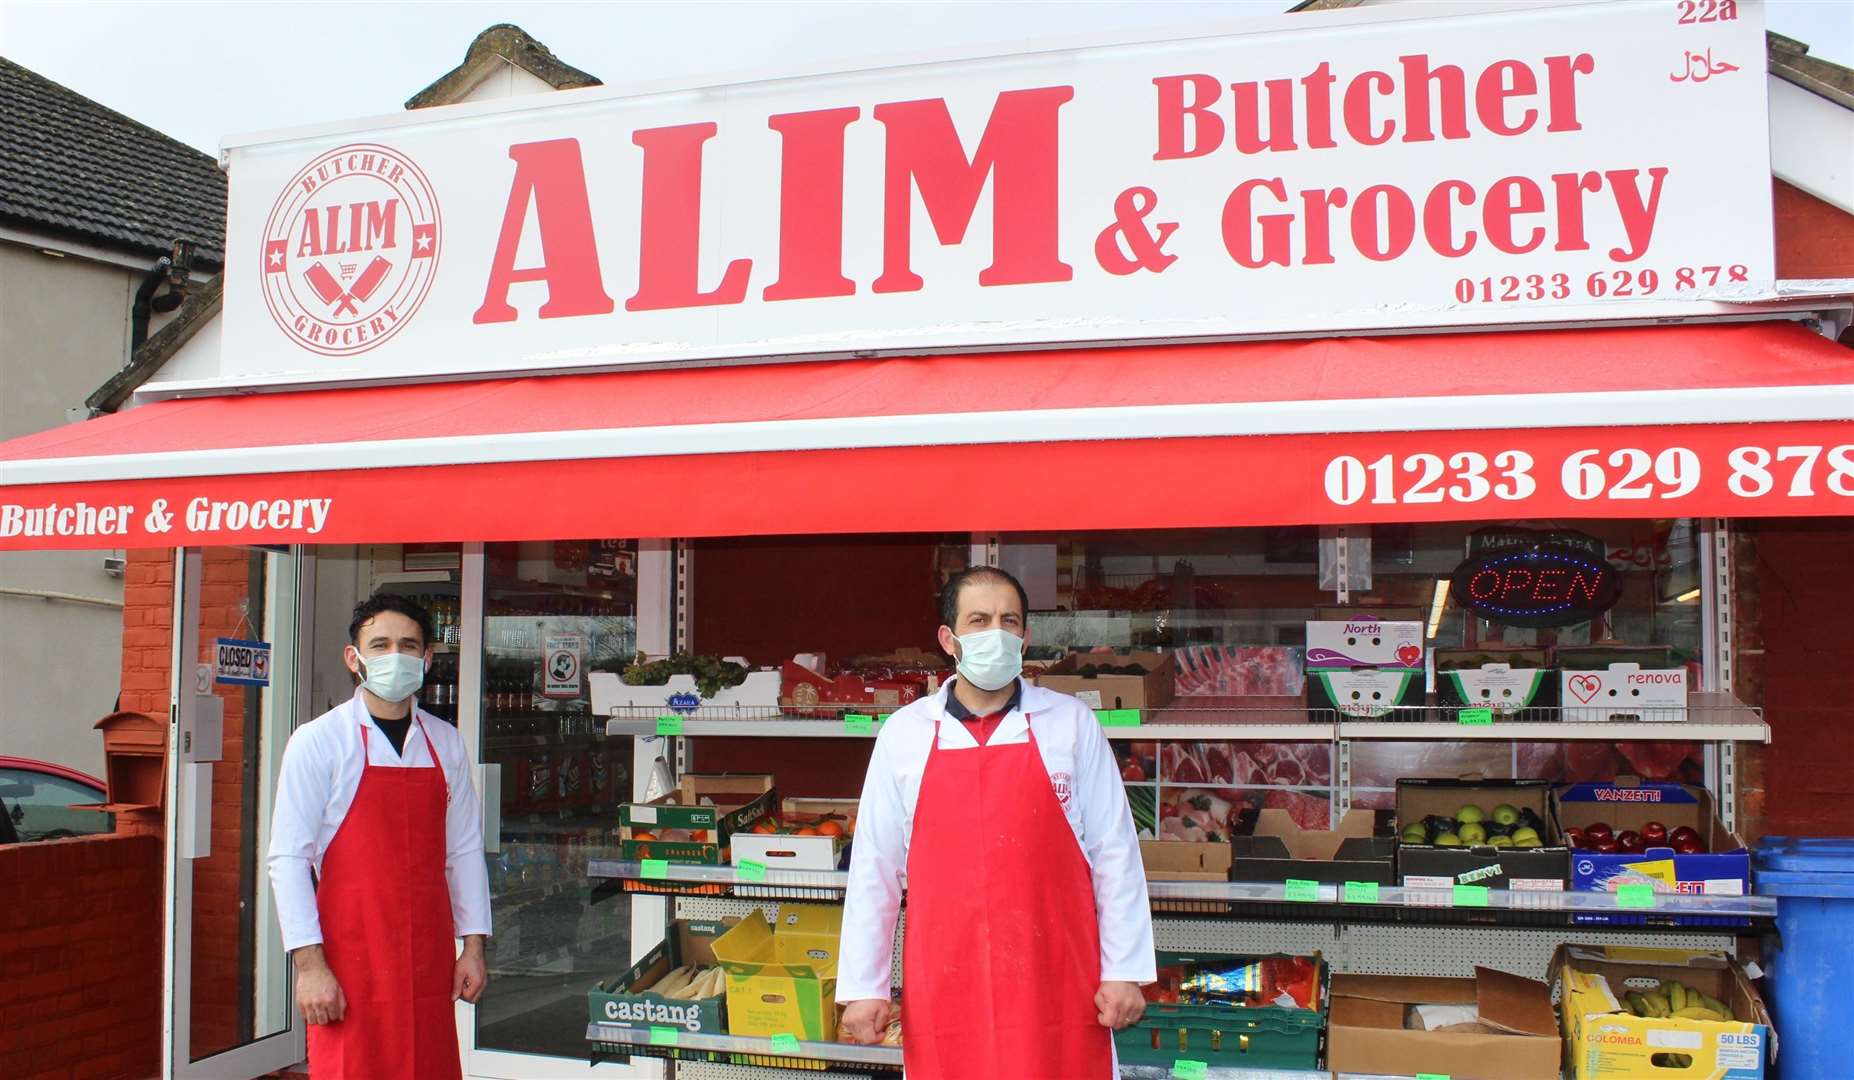 Ibrahim Awad, right, with his business partner Kalim Dogan in 2021; the site was then called Alim Butcher and Grocery. Picture: Ashford Borough Council